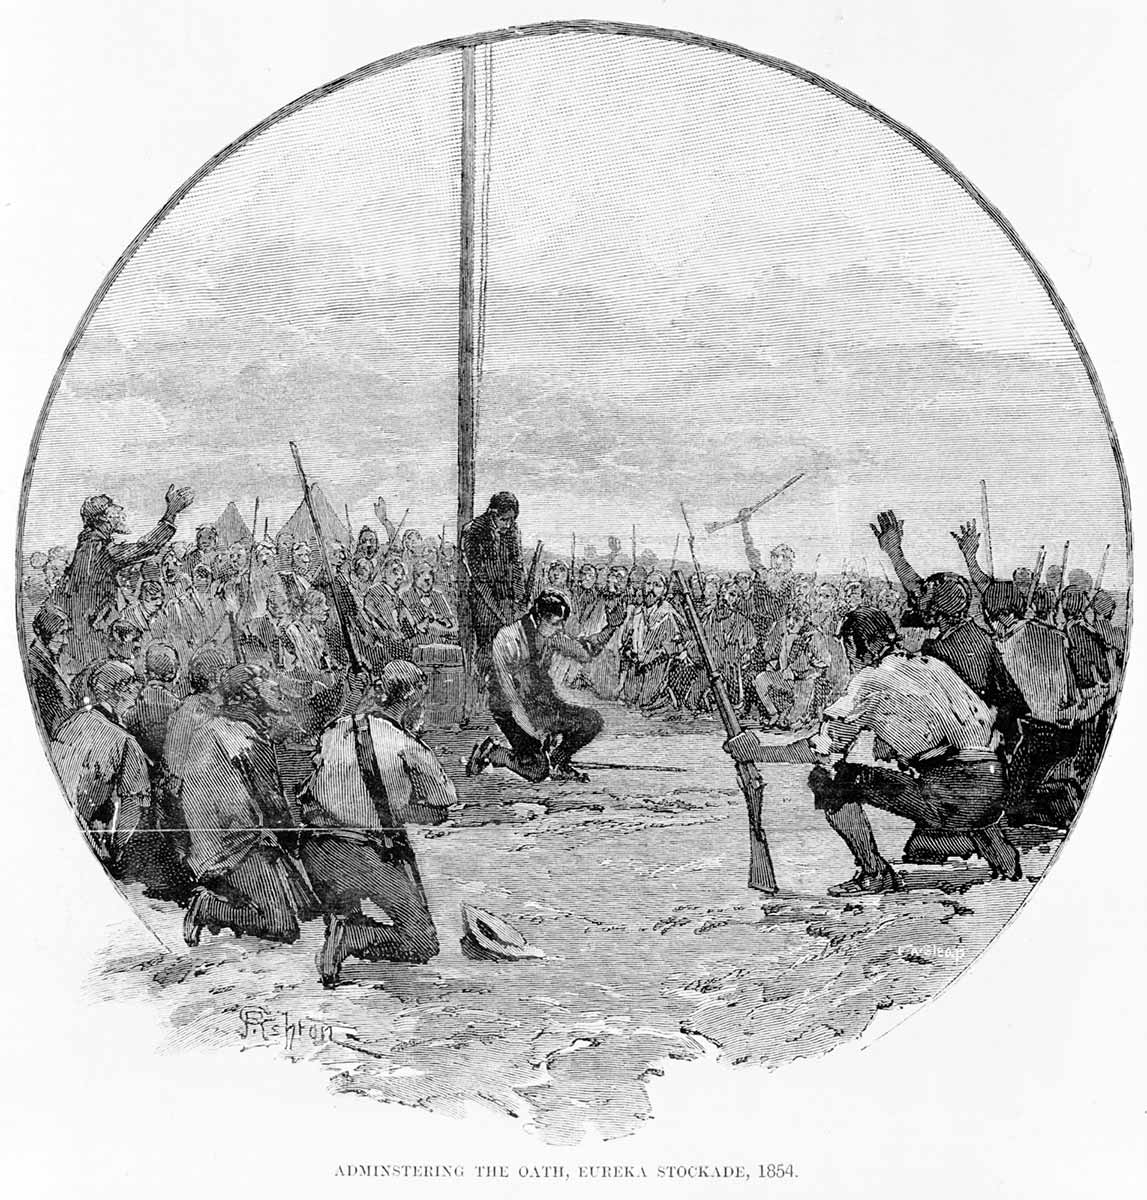 Illustration of an army of soldiers kneeling around a flagpole. Some are lifting their arms upwards in a motion of victory. Printed at the bottom is 'ADMINISTERING THE OATH, EUREKA STOCKADE, 1854'.